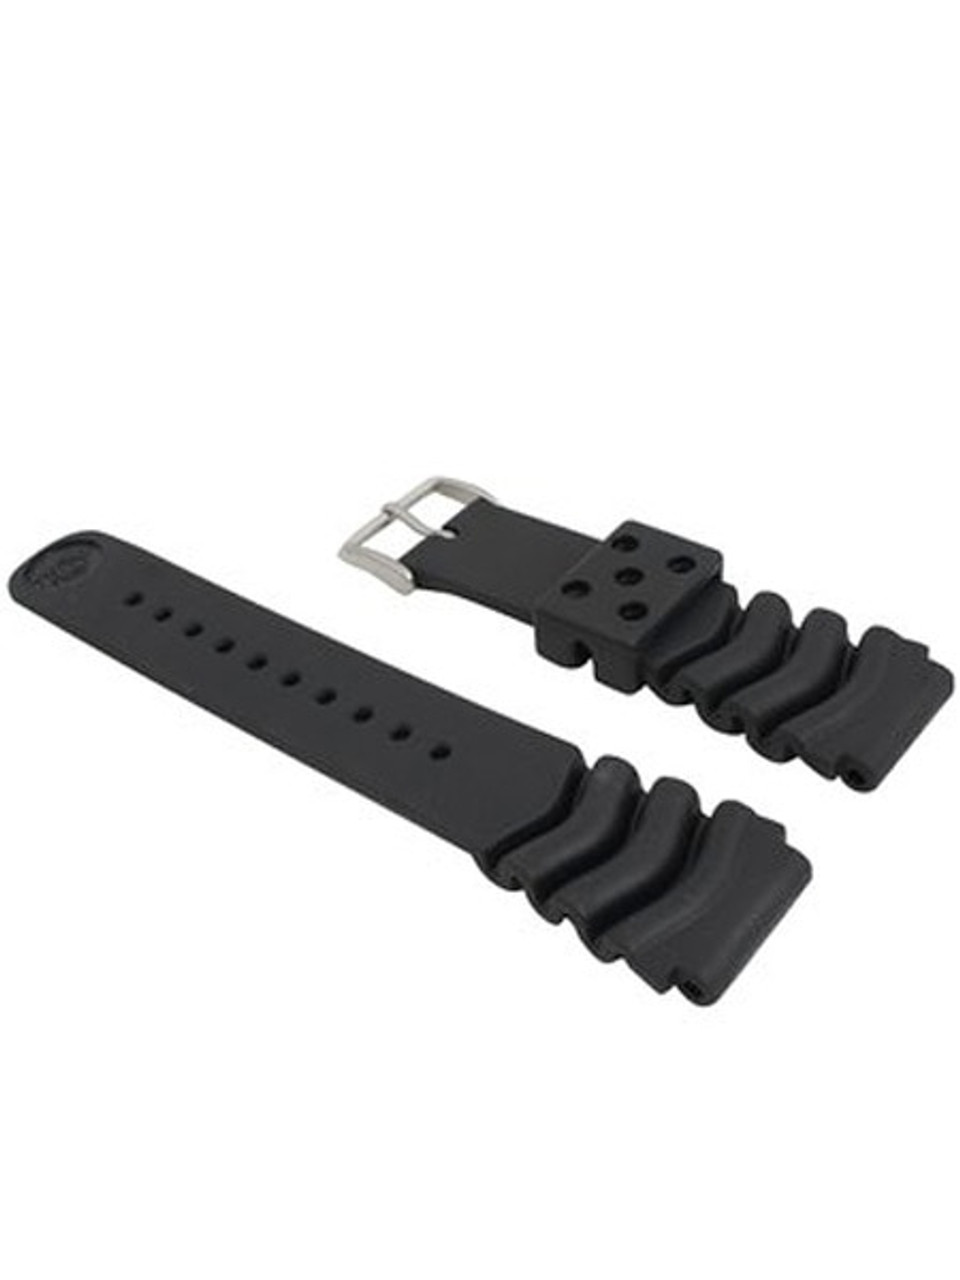 Seiko Rubber Dive Strap For SKX007 and SKX009 Watches #4FY8JZ